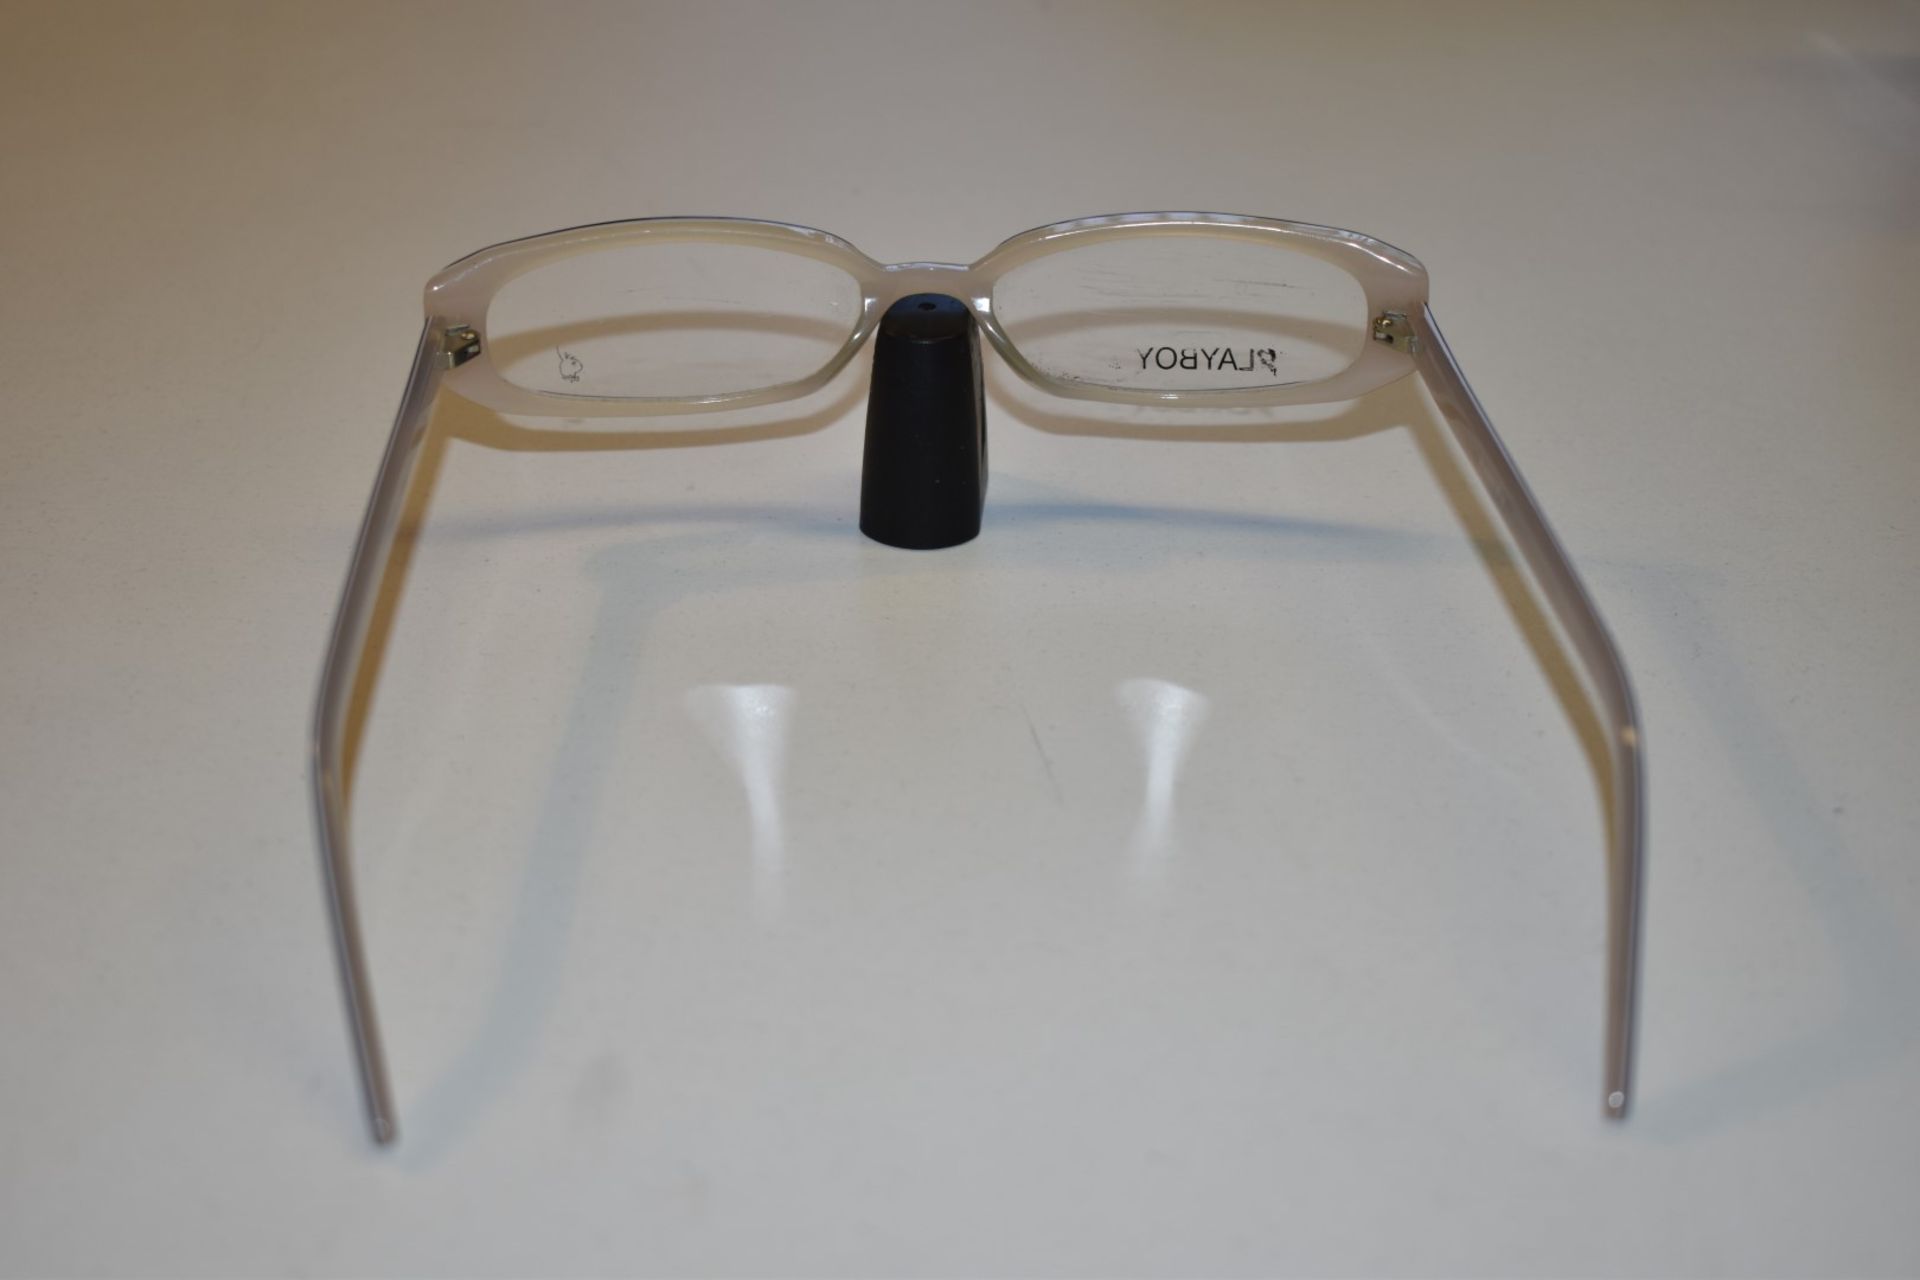 1 x Genuine PLAYBOY Spectacle Eye Glasses Frame - Ex Display Stock  - Ref: GTI178 - CL645 - - Image 5 of 12